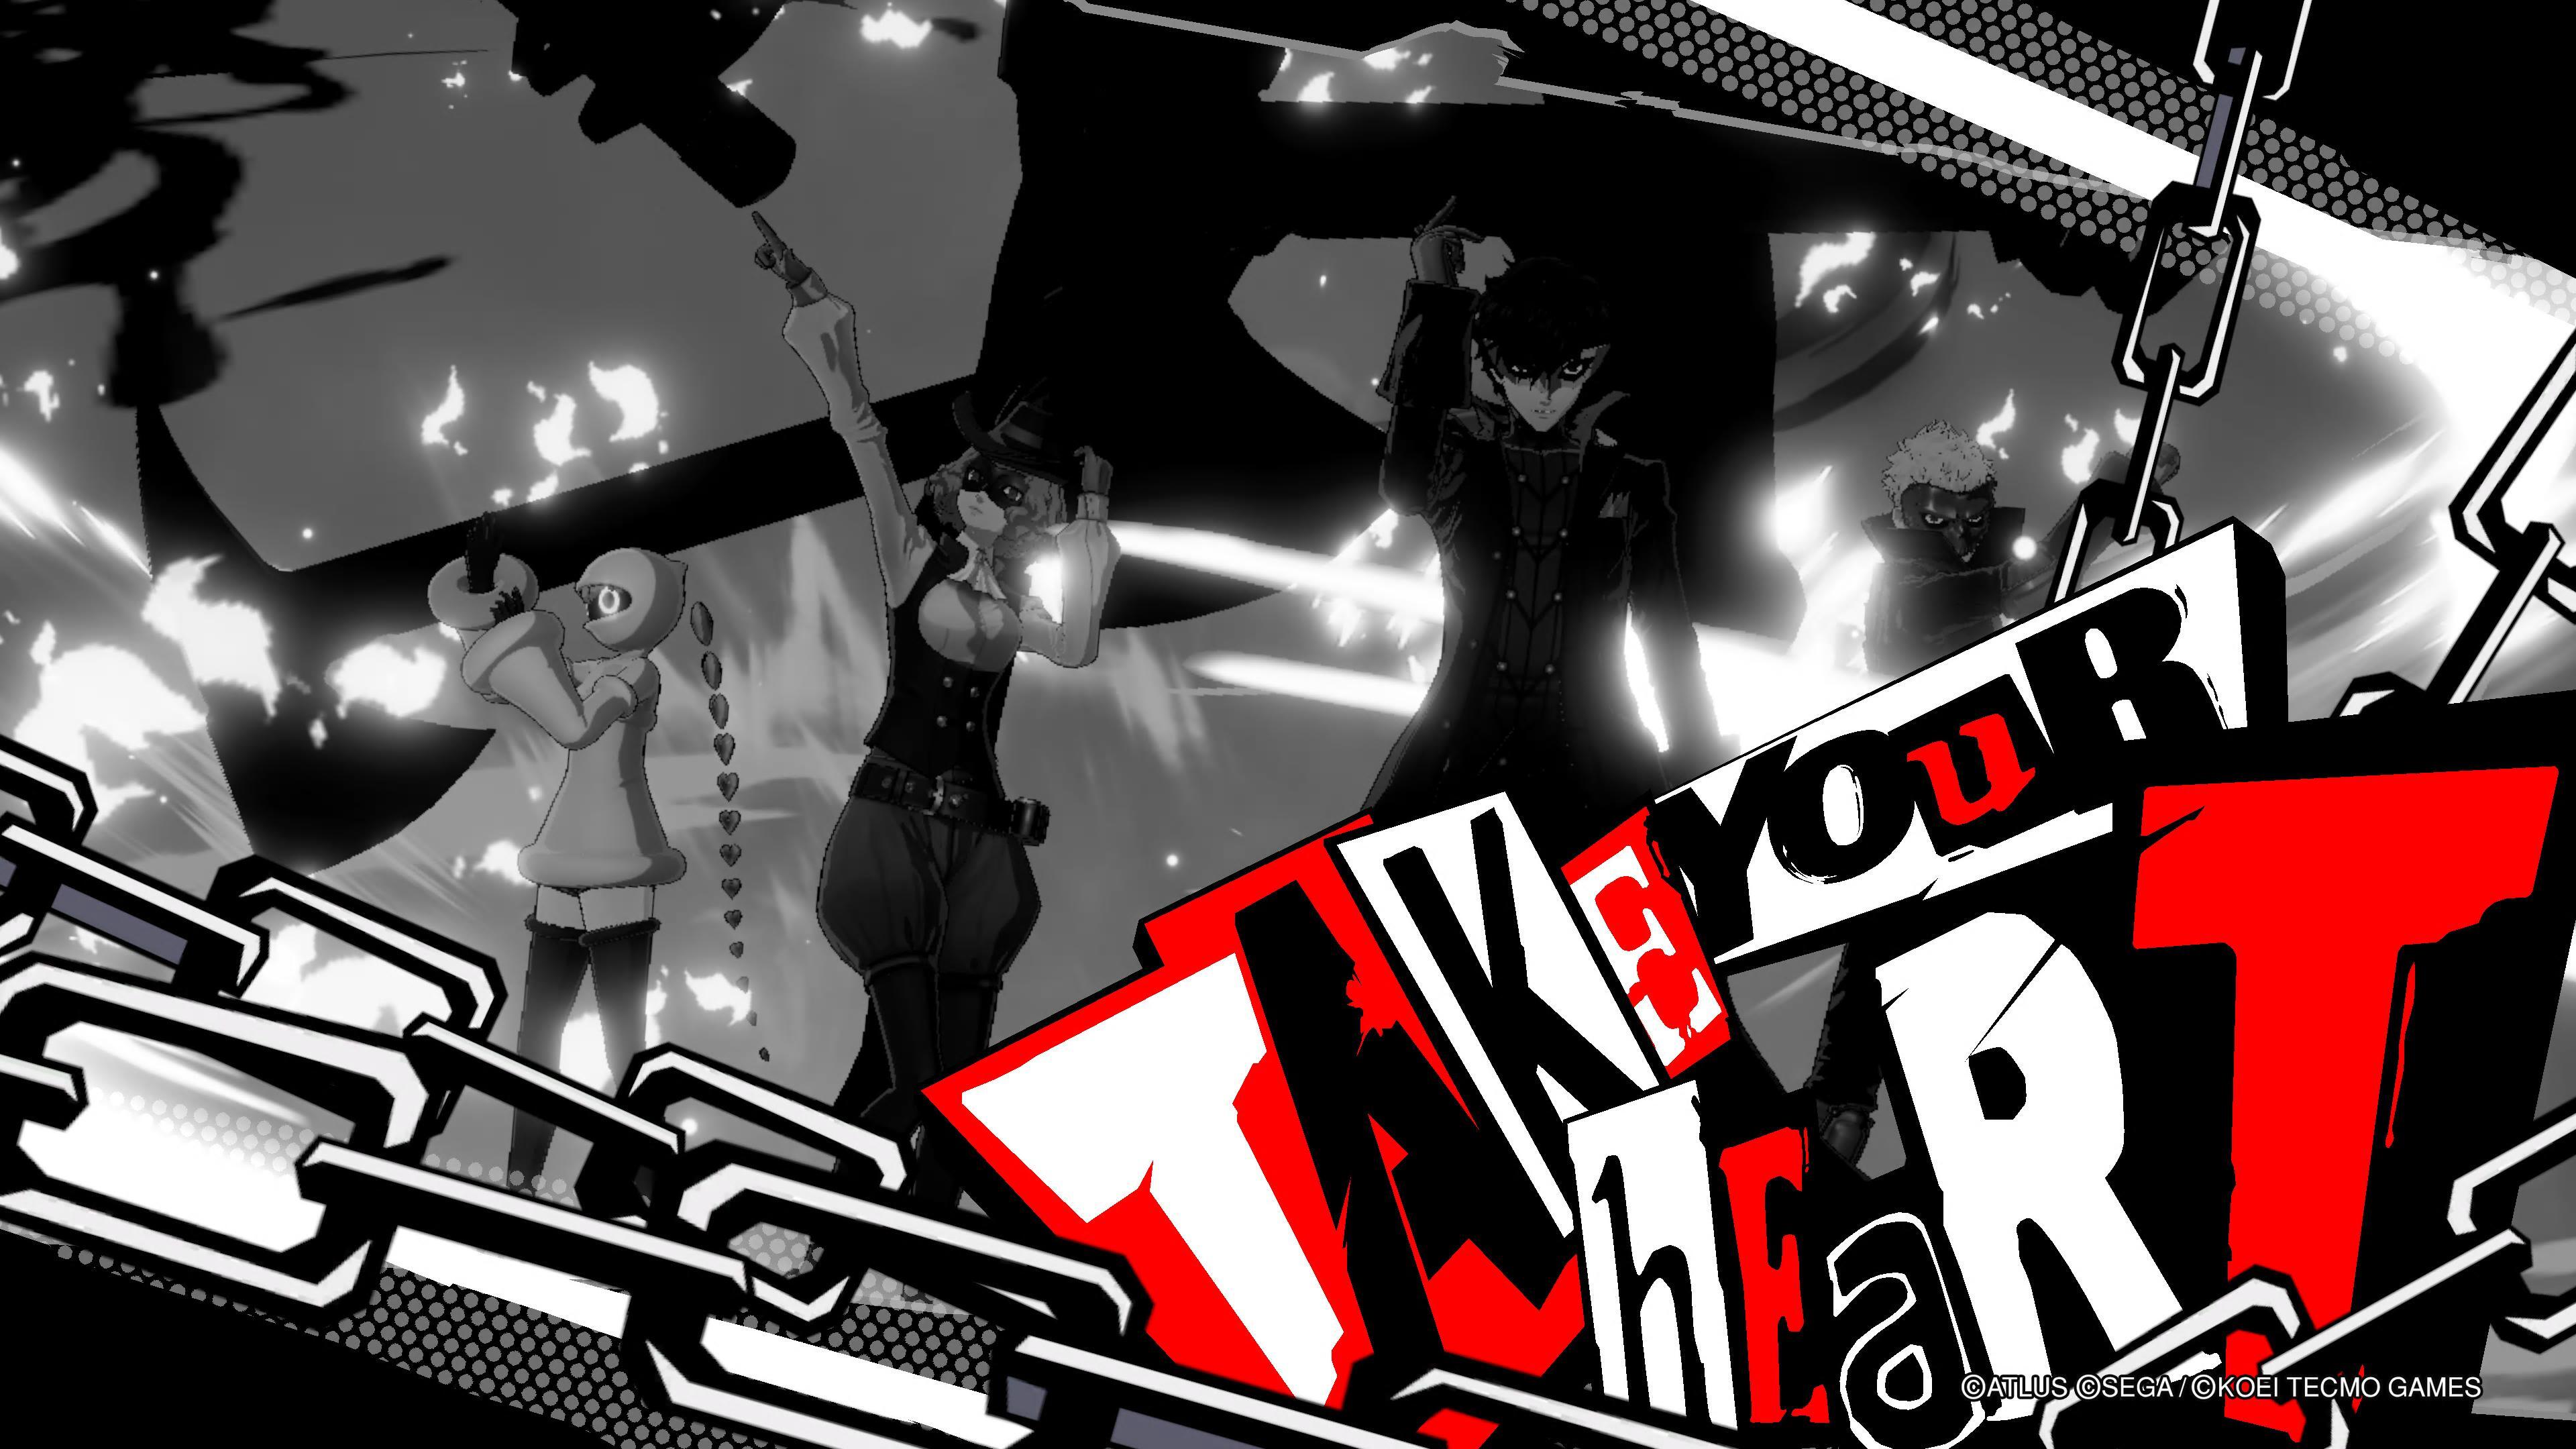 Persona 5 Royal review: the definitive version of an already brilliant RPG  - The Verge